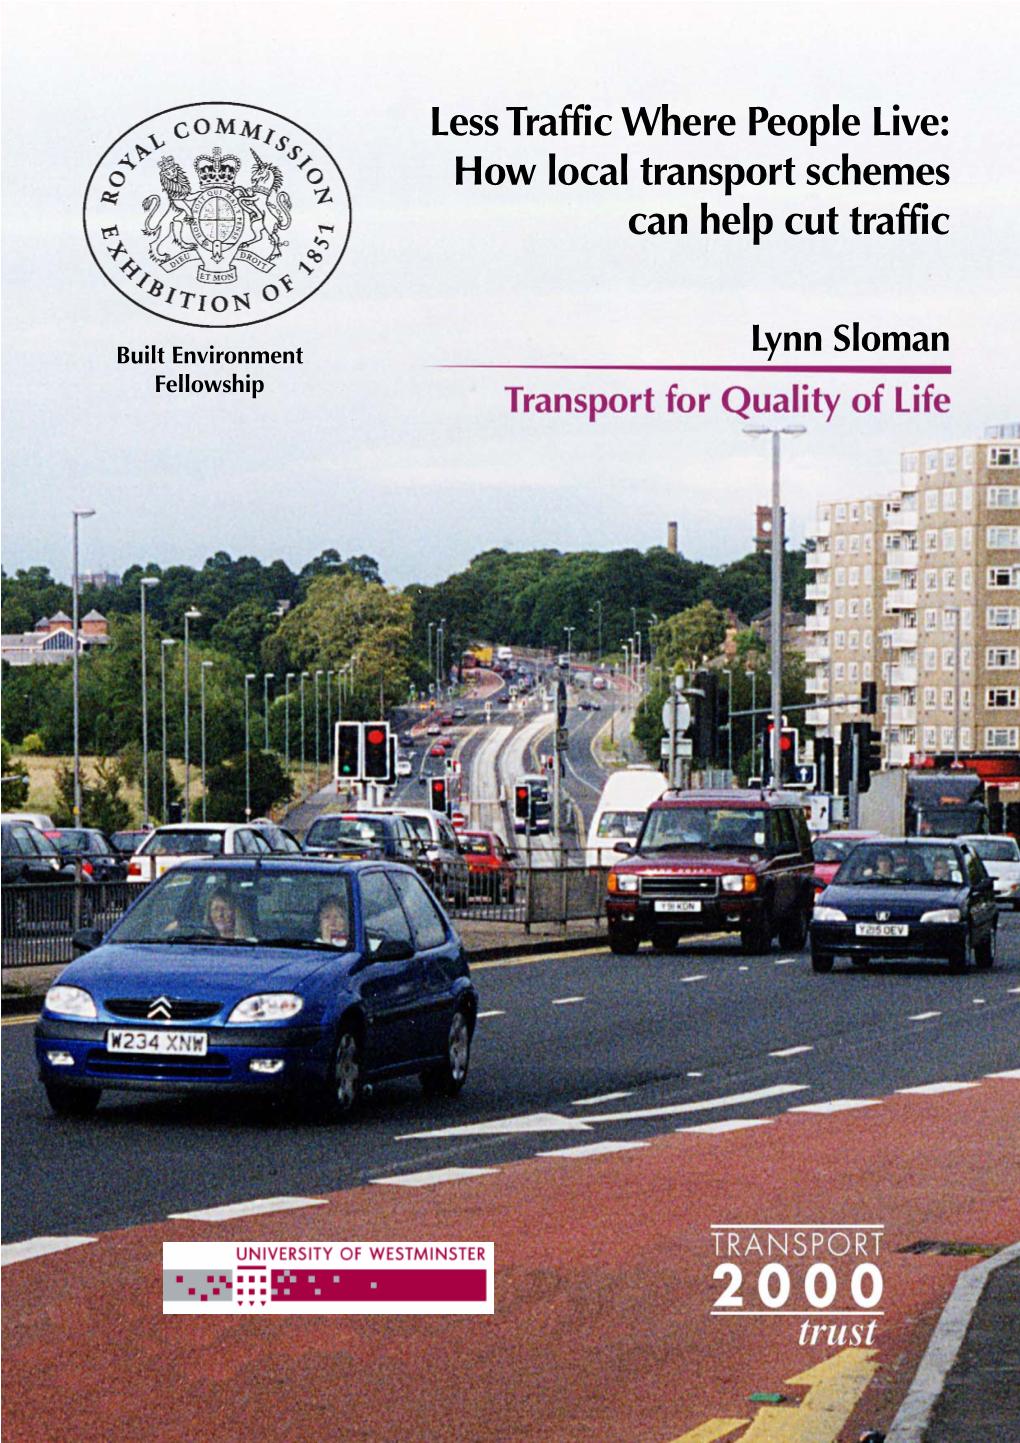 Less Traffic Where People Live: How Local Transport Schemes Can Help Cut Traffic